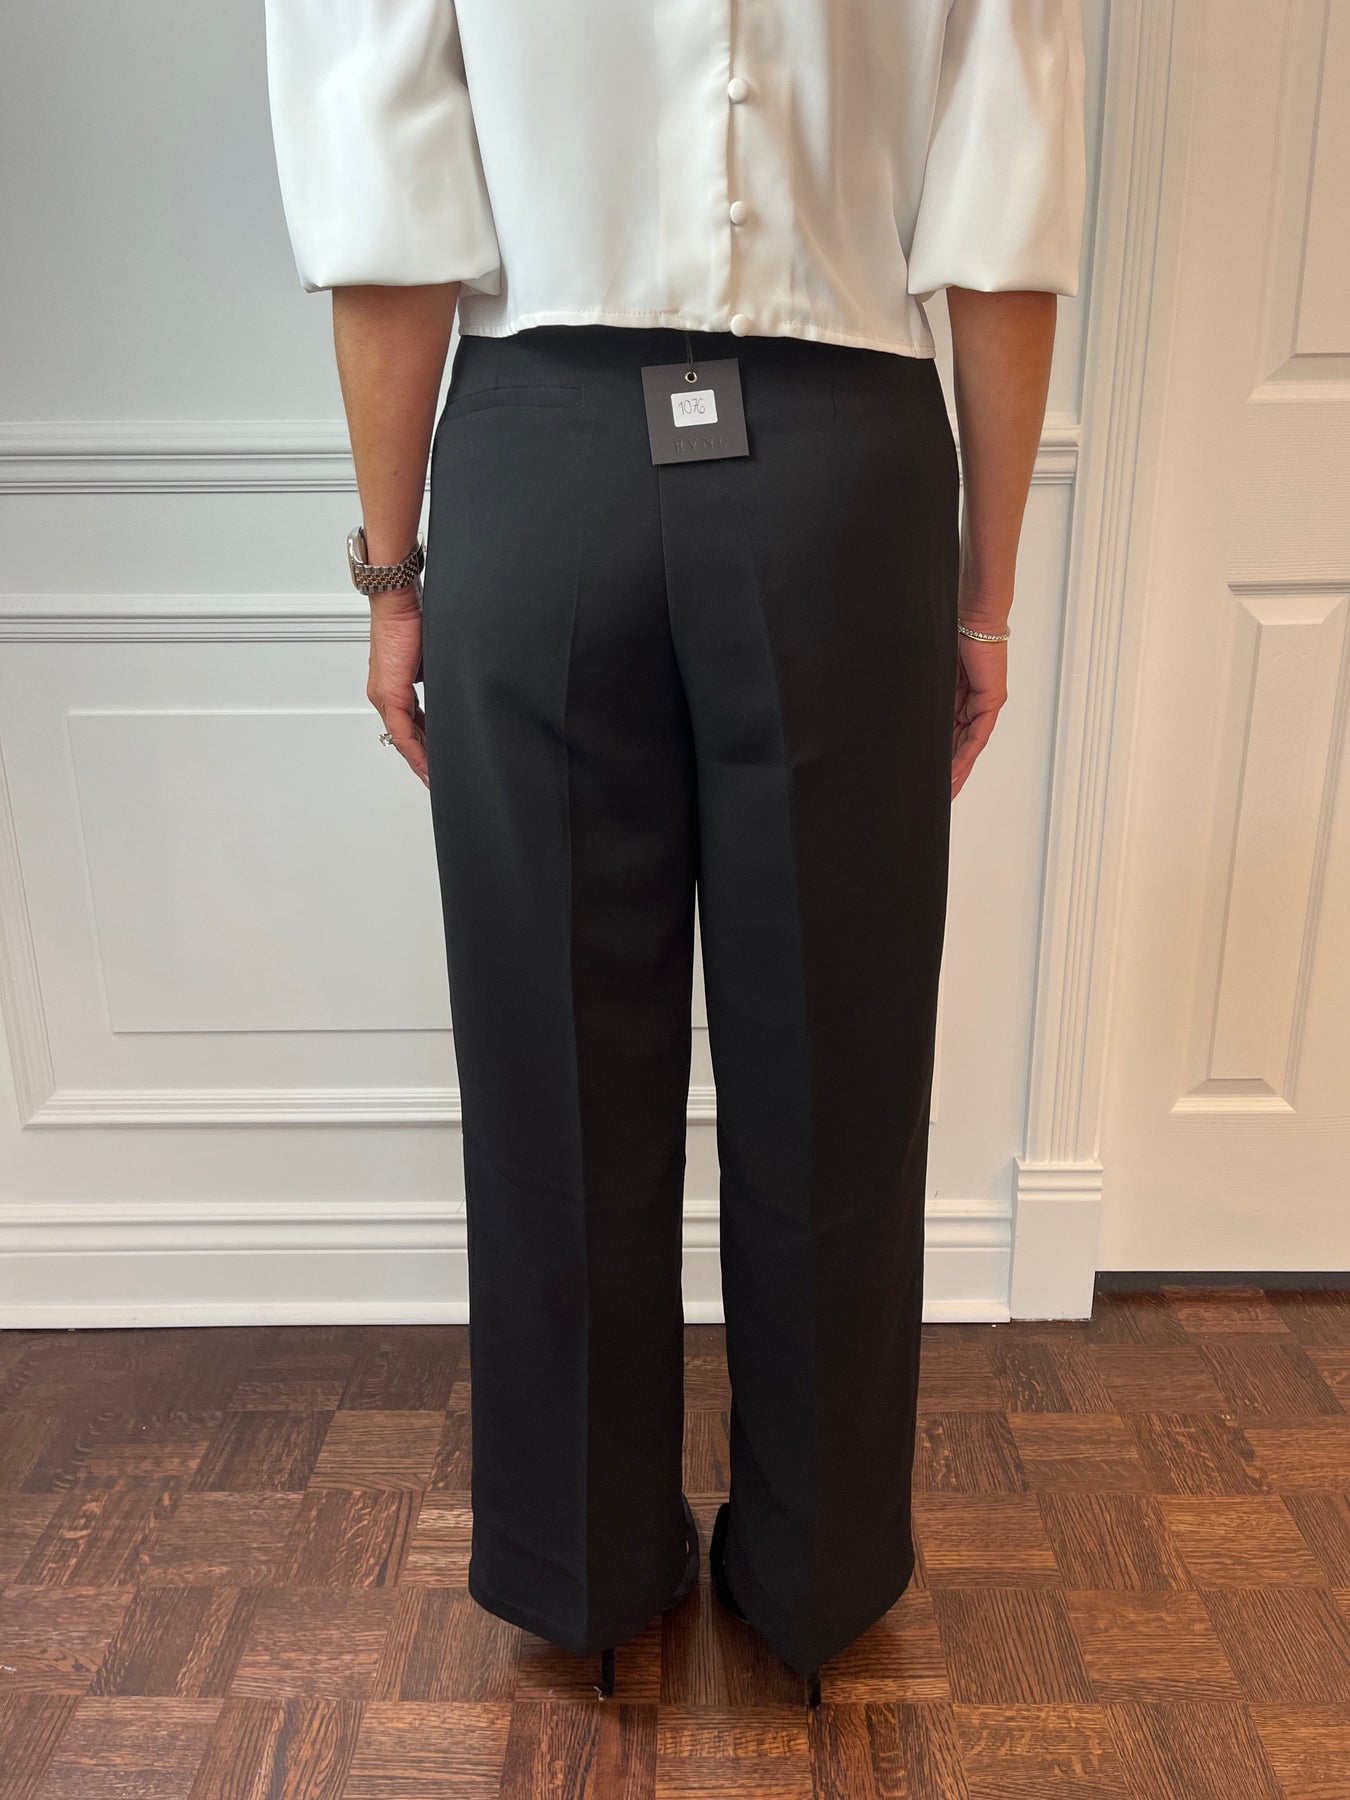 The New Fancy Black Pant